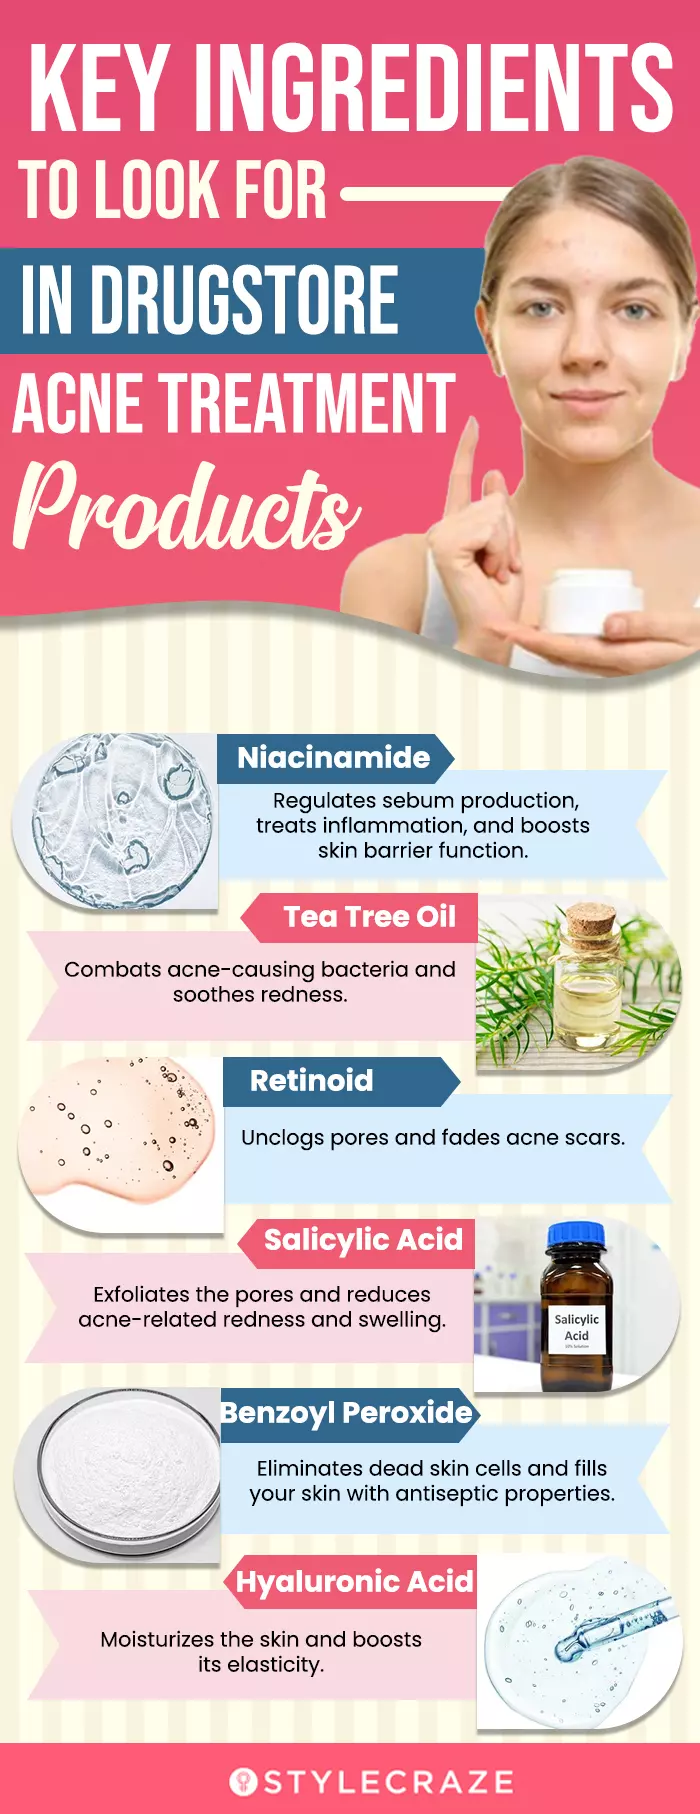 Key Ingredients To Look For In Drugstore Acne Treatment Products (infographic)